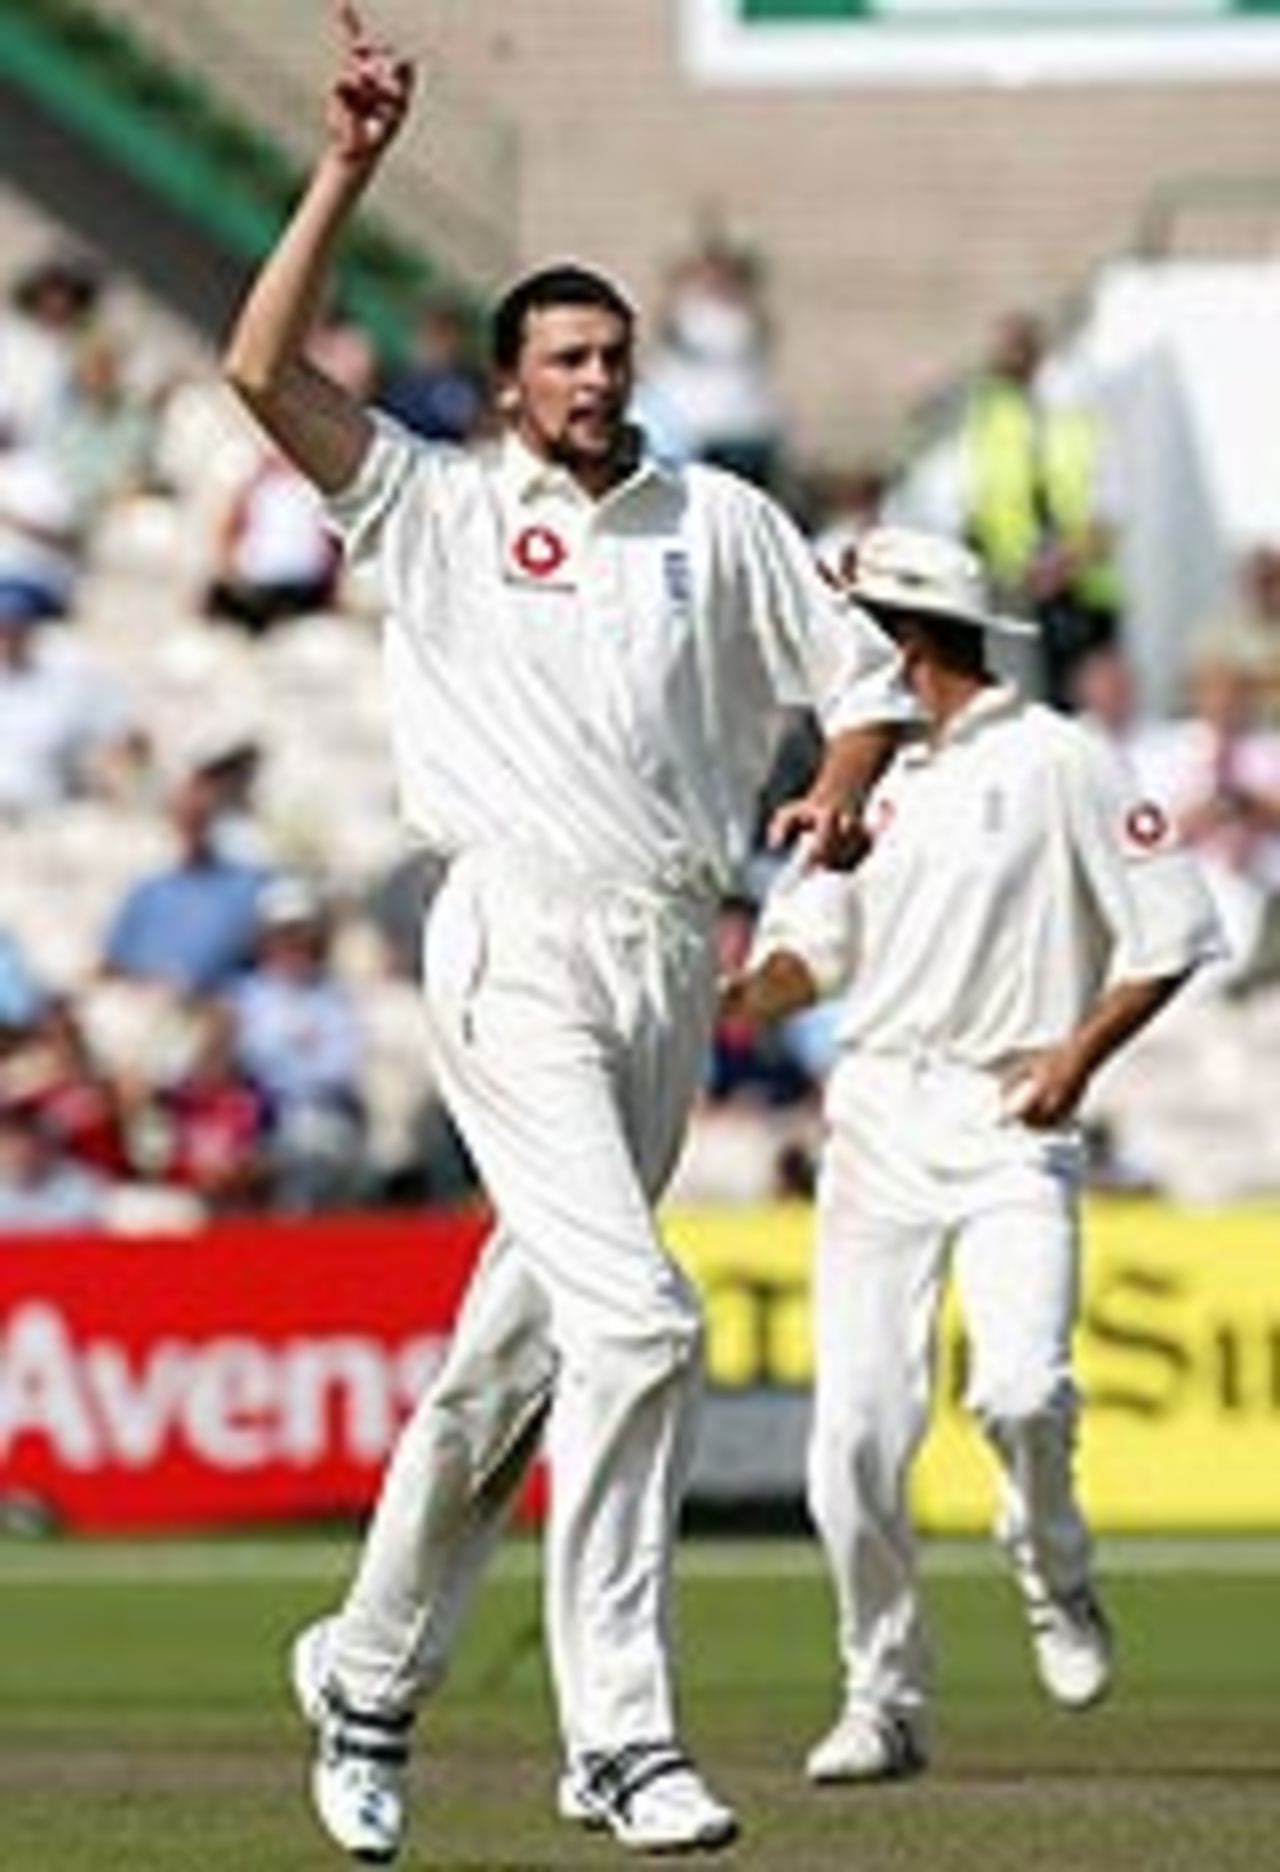 Steve Harmison took the final wicket to fall, as England were set 231 for victory at Old Trafford, August 16, 2004